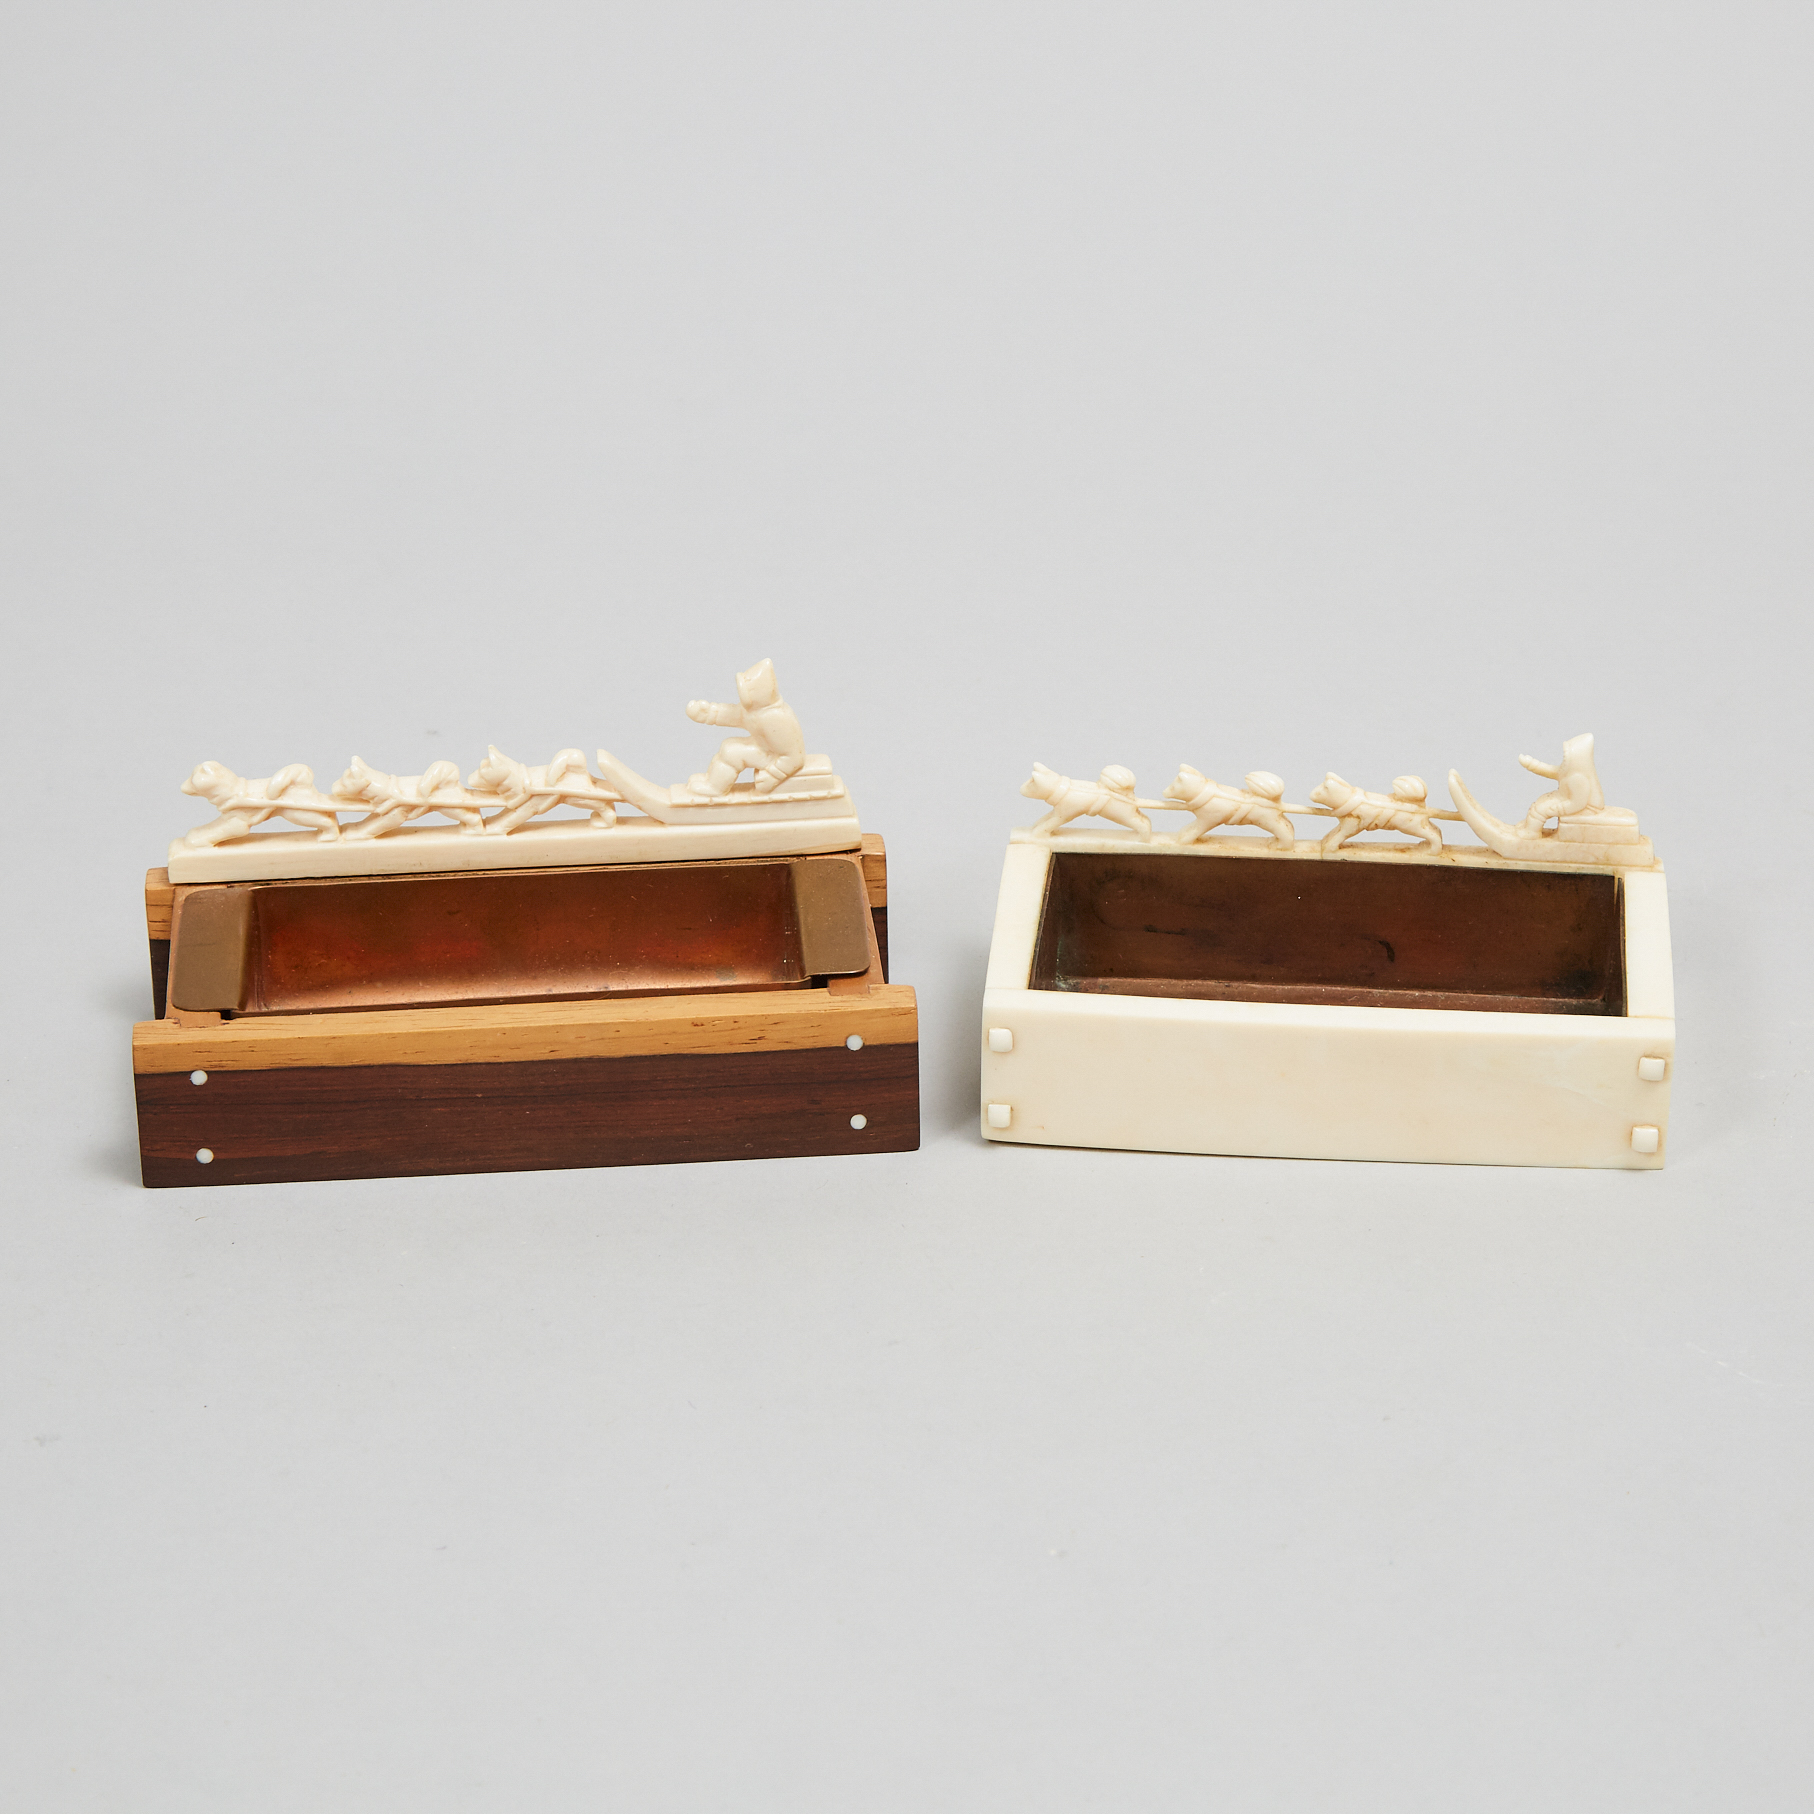 Two Grenfell Labrador Industries Marine Ivory Dog Sled and Team Form Vide Poches, mid 20th century